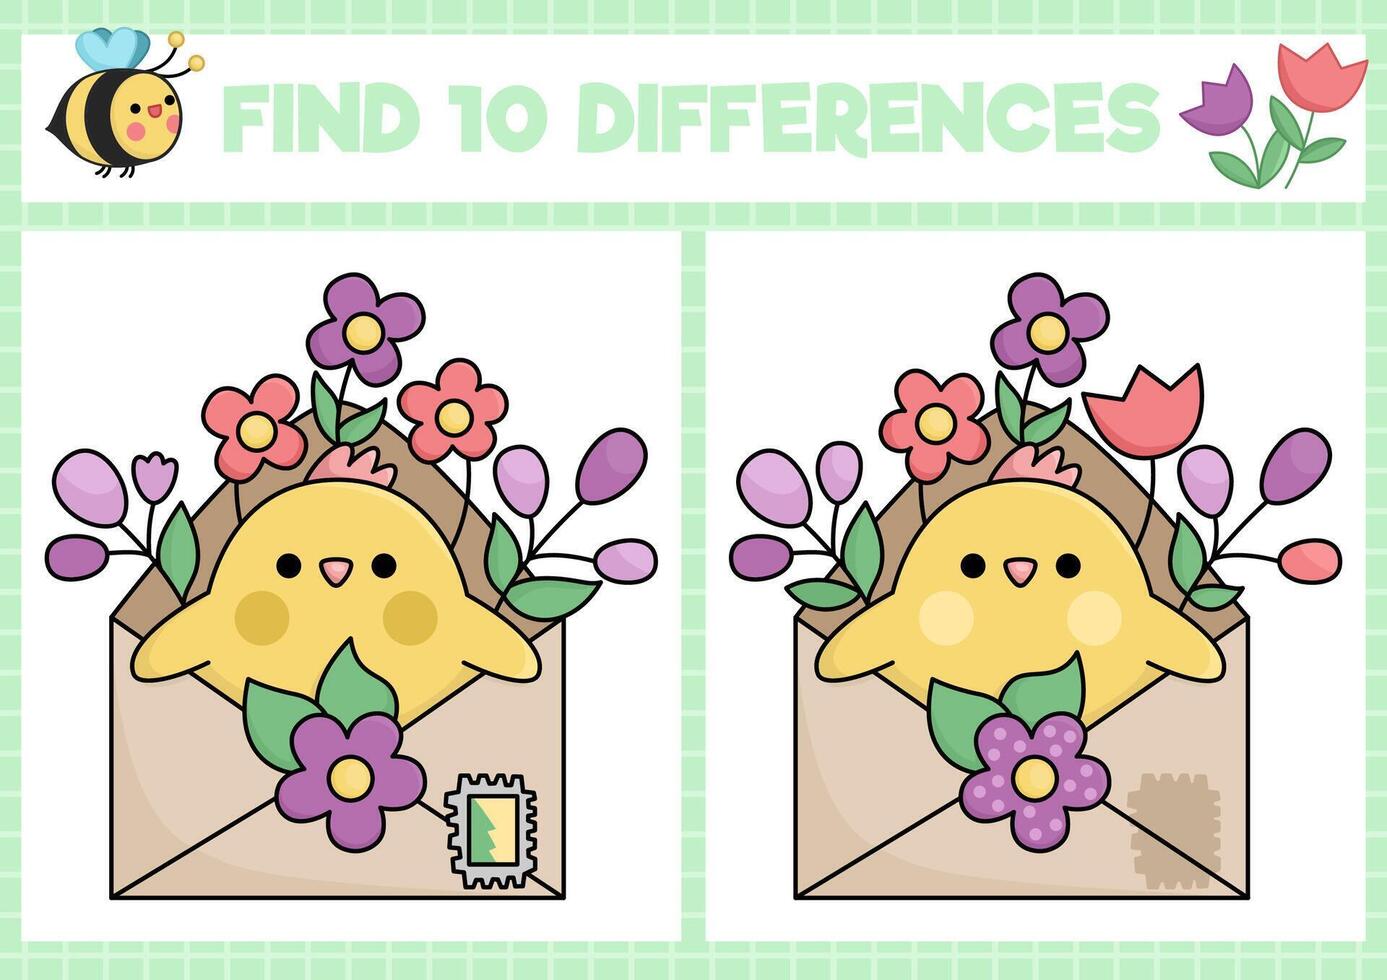 Spring kawaii find differences game for children. Attention skills activity with cute chick in envelope with flowers. Garden puzzle for kids with funny character. Printable what is different worksheet vector